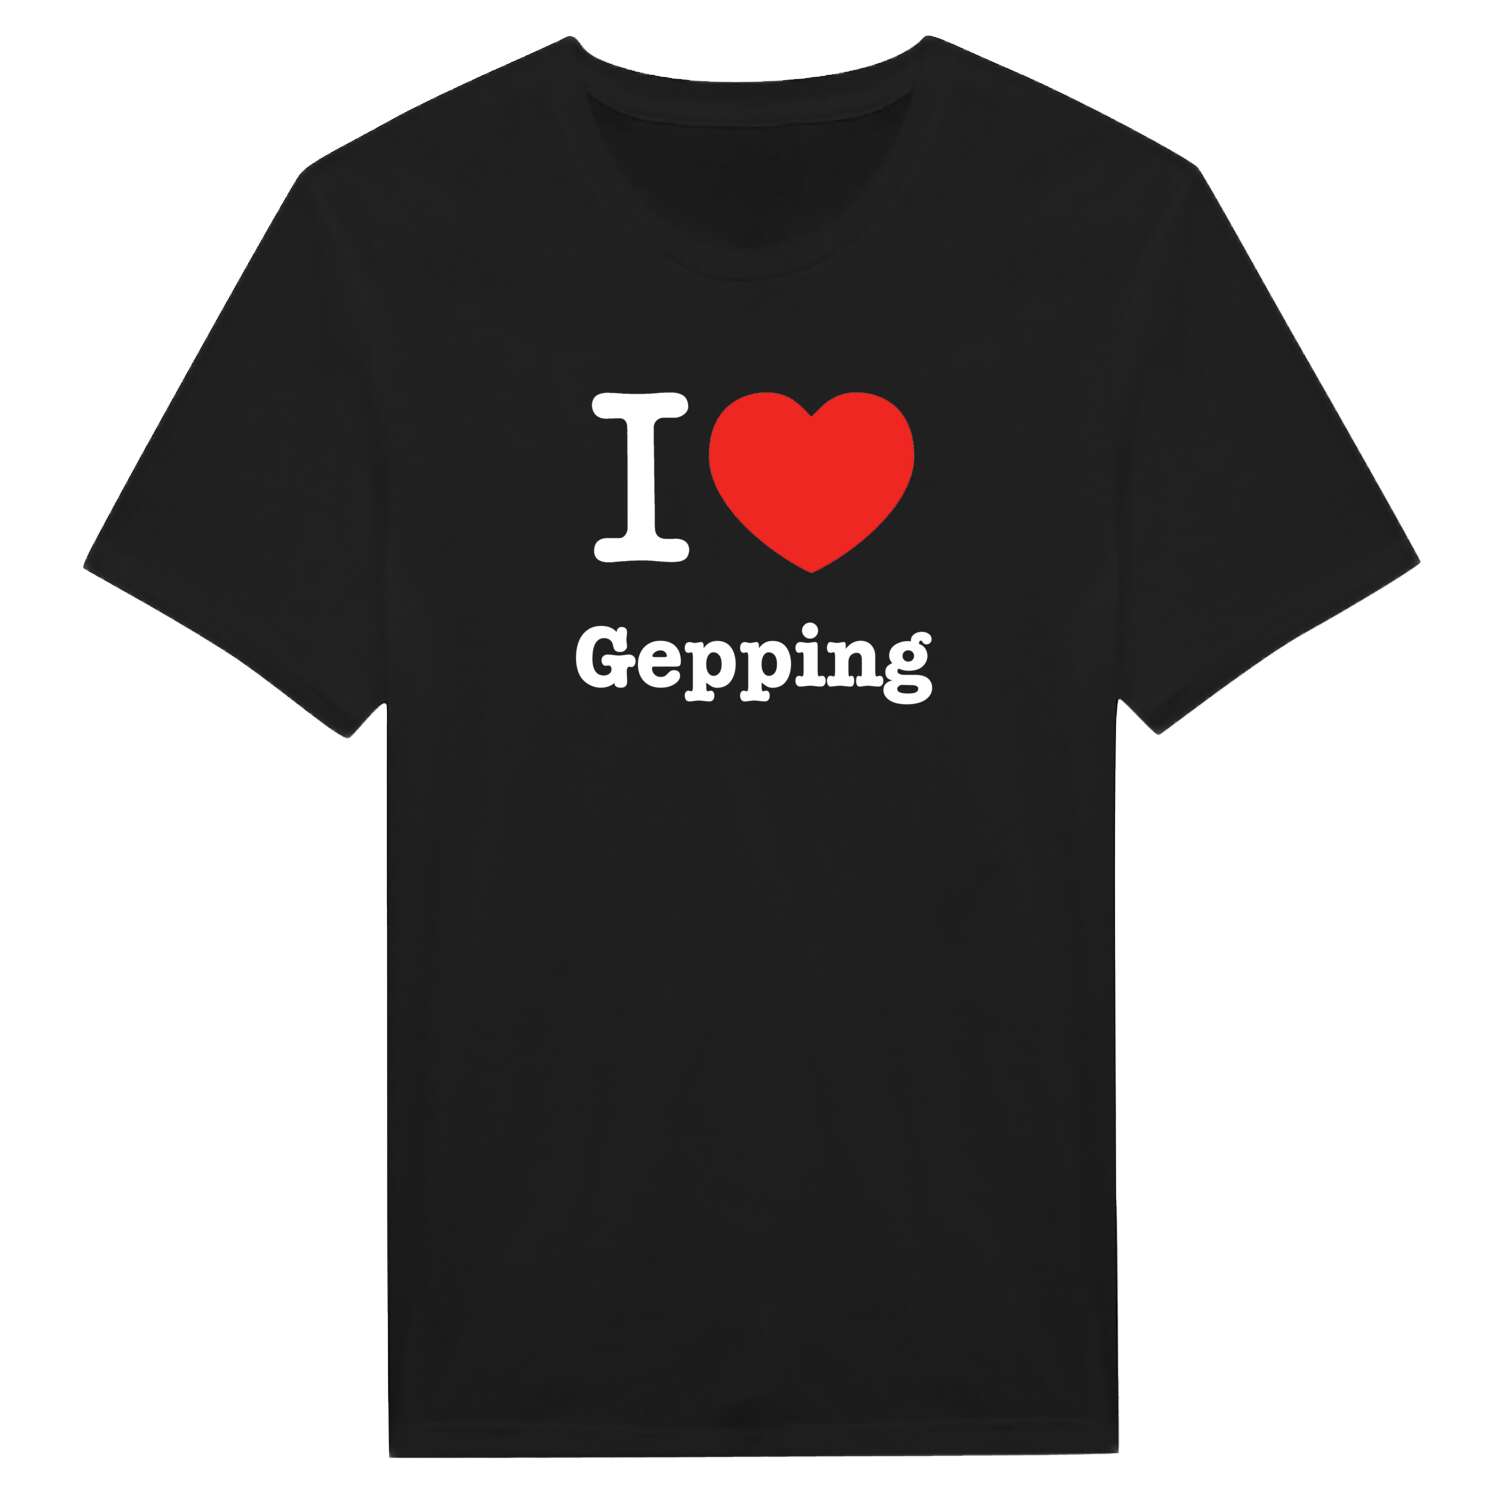 Gepping T-Shirt »I love«